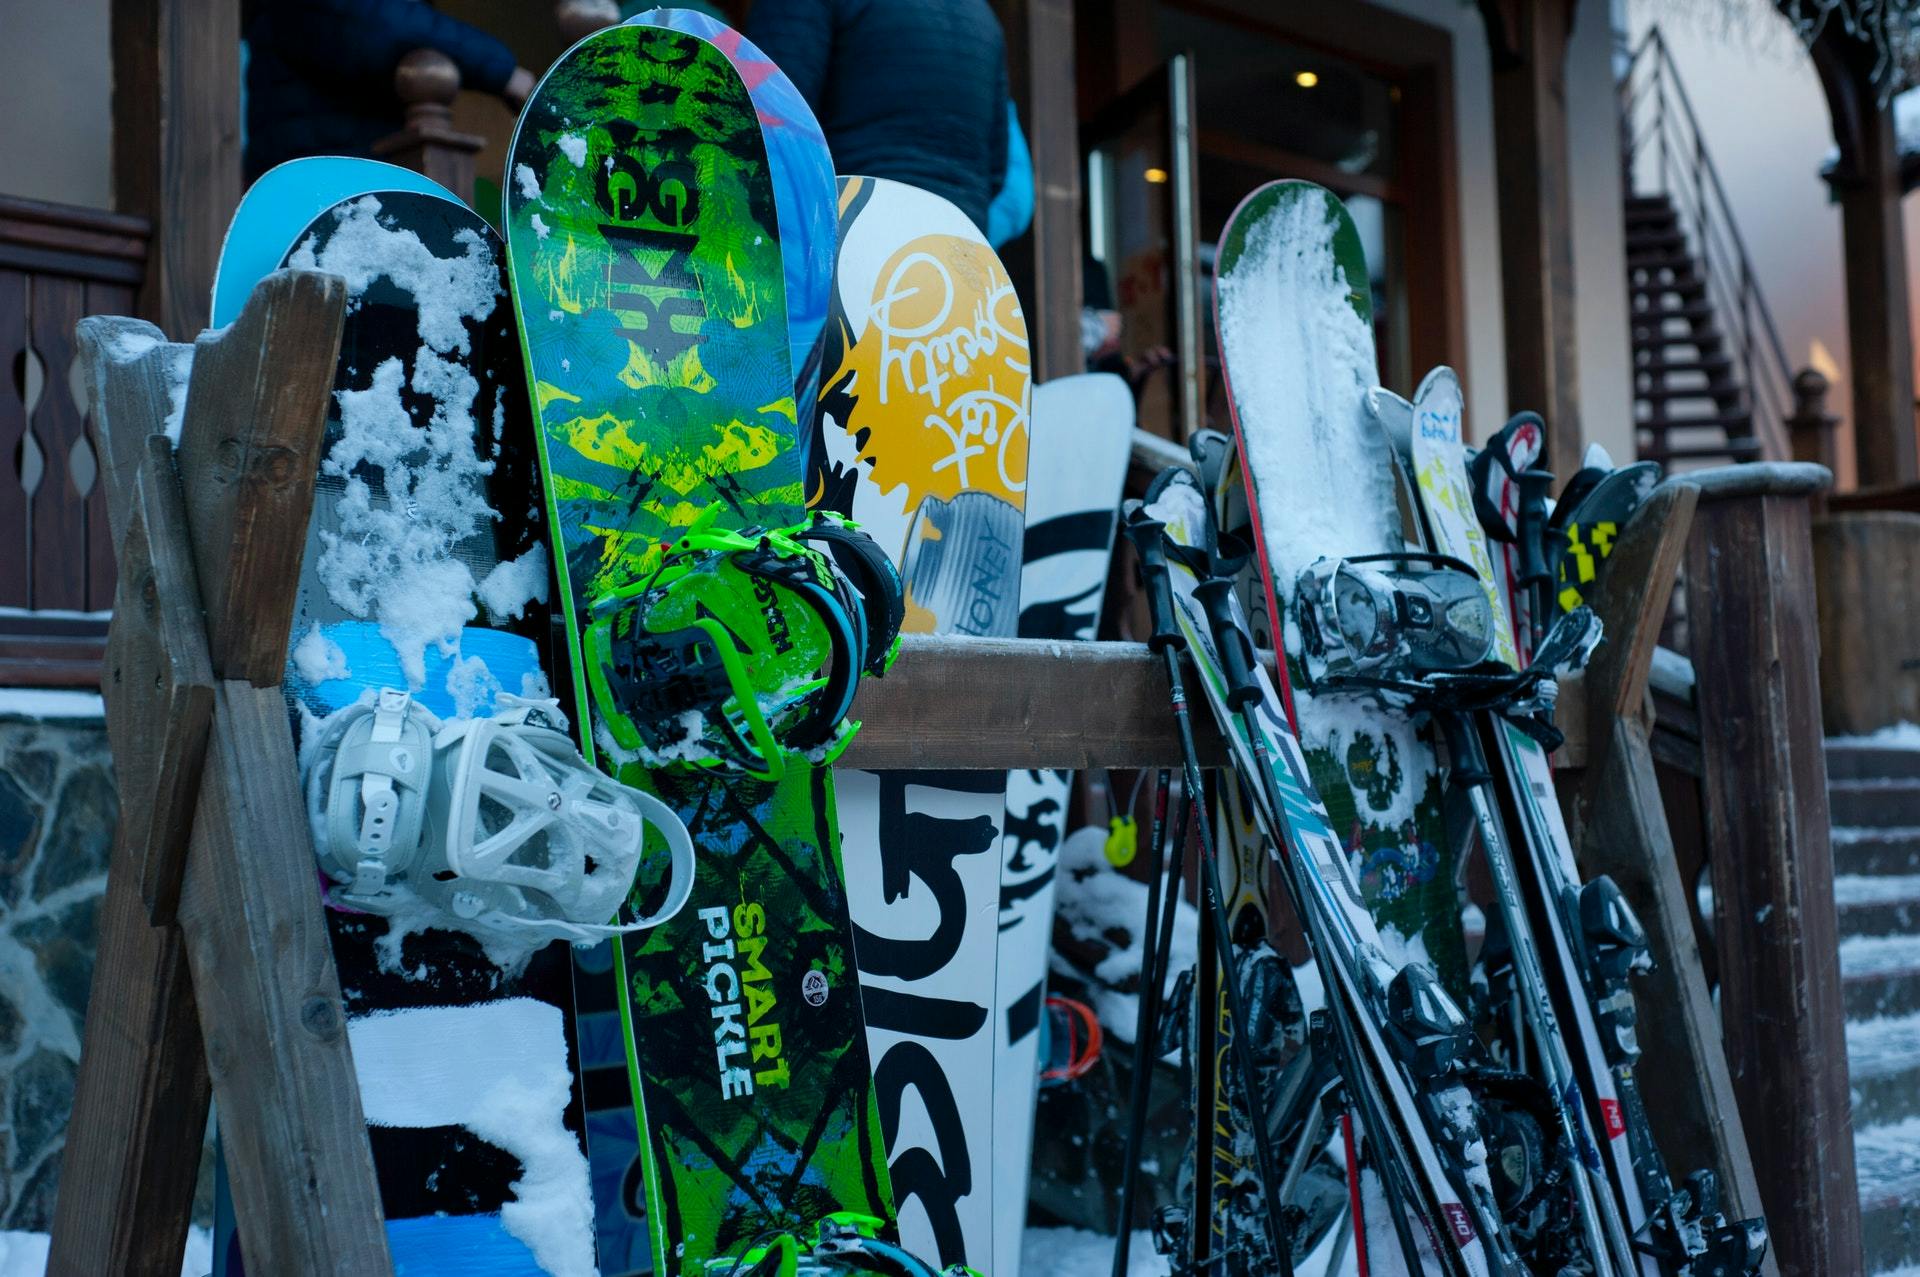 Snowboards lean on an outdoor rack. 